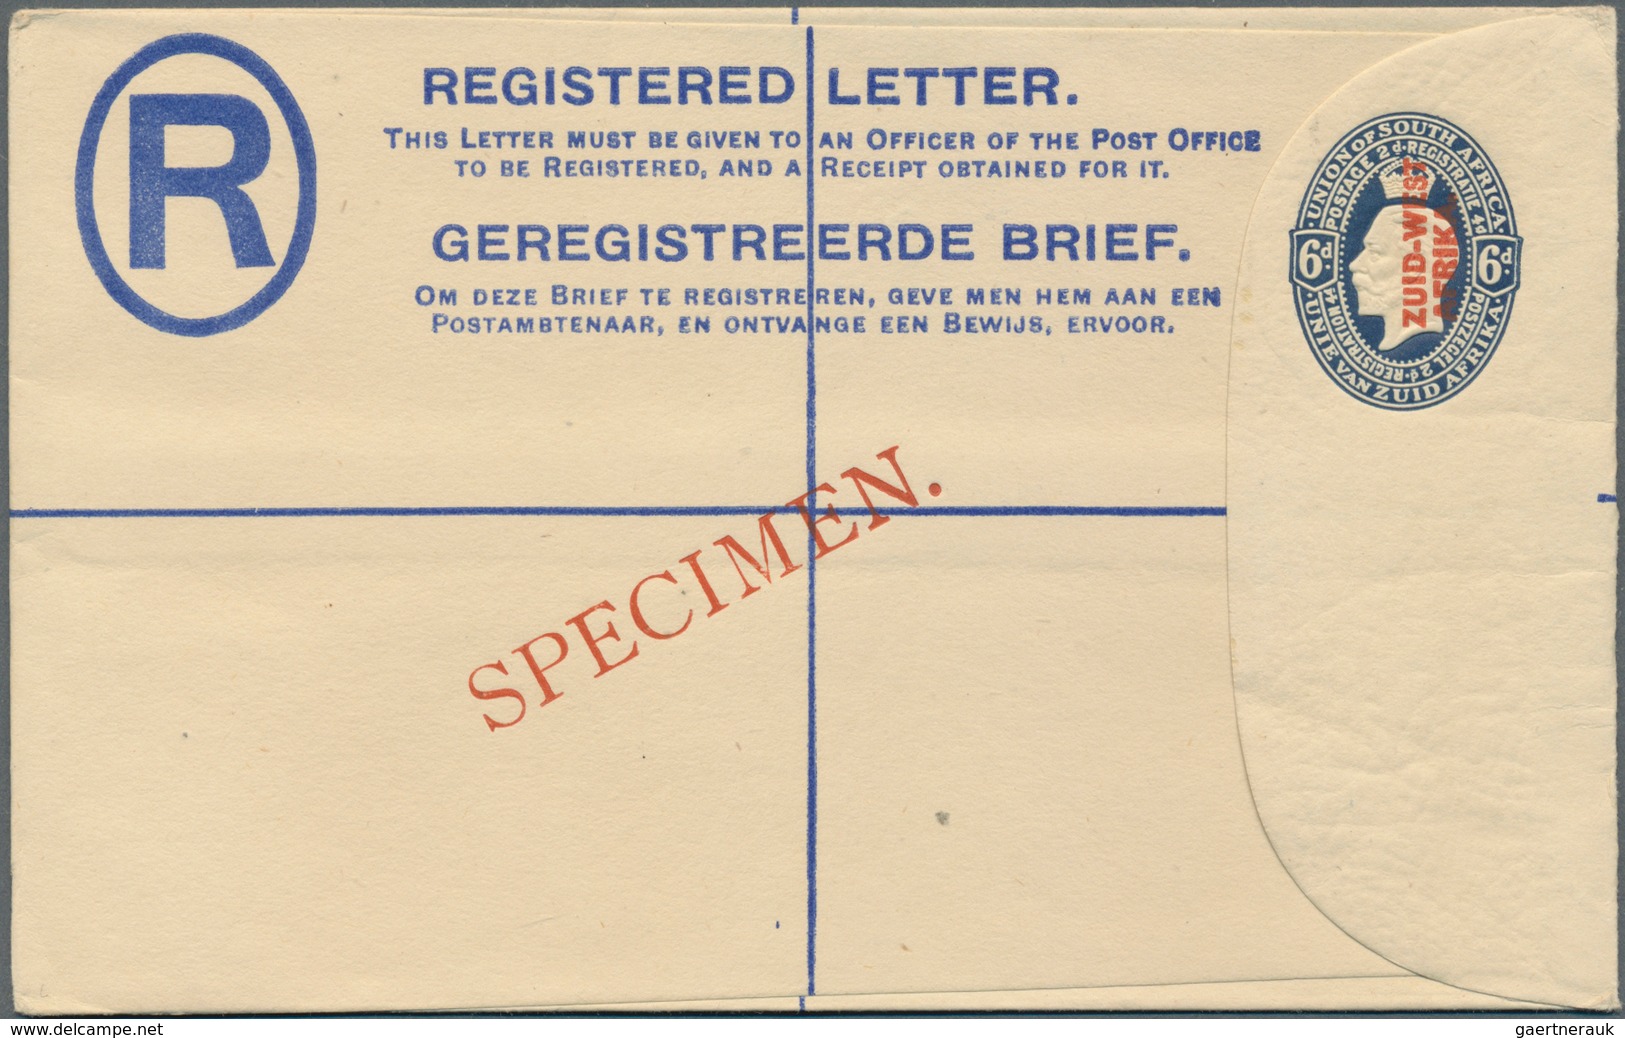 Südwestafrika: 1924/2000 (ca.), POSTAL STATIONERY: accumulation with about 470 postal stationeries w